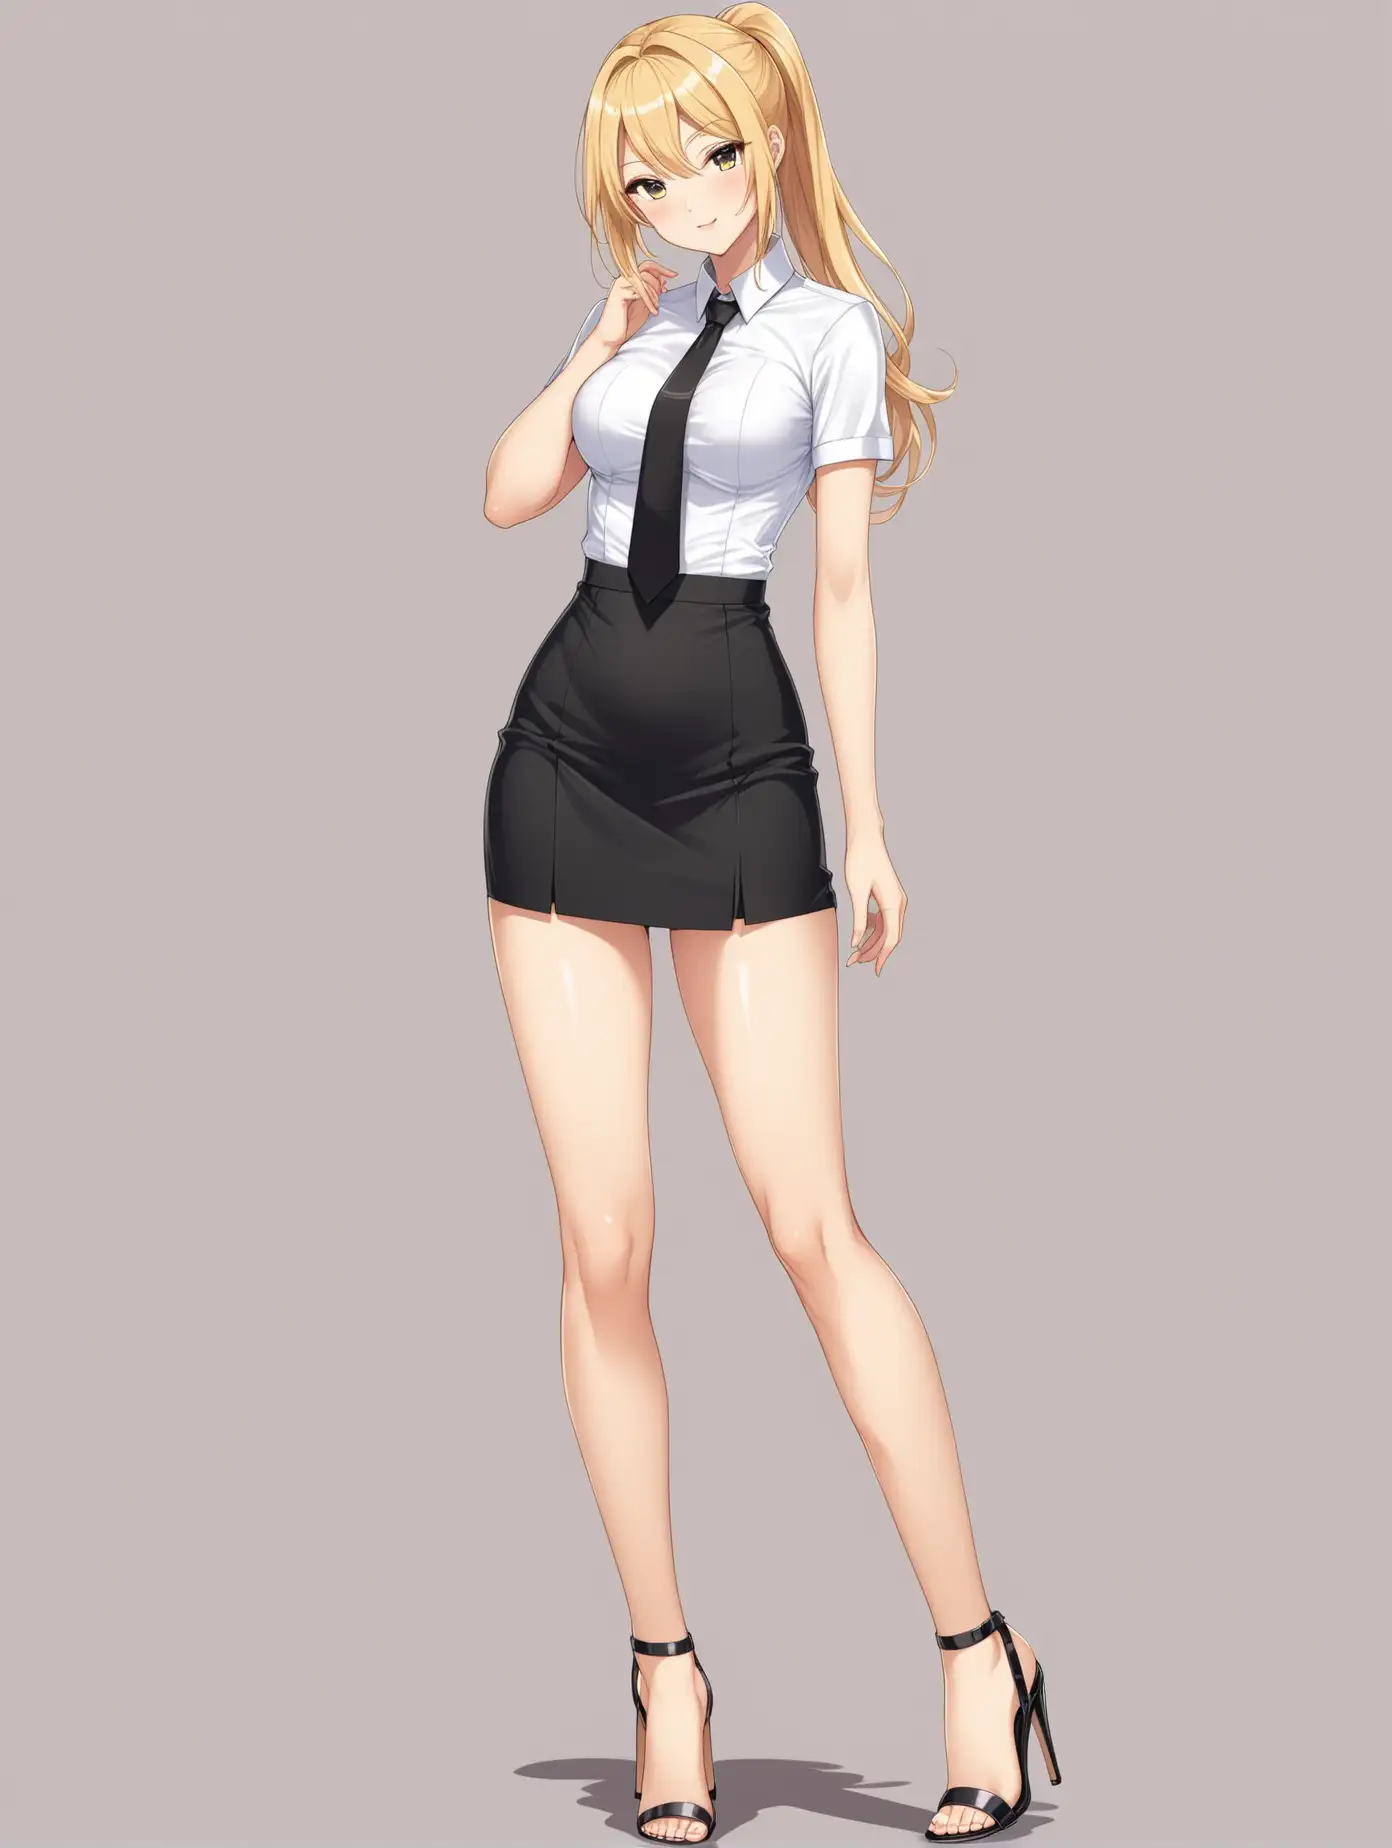 Sensual picture in full body of an anime girl, hot, elegant, office directory outfit, height tall, blonde hair, long ponytail, ankle strip high heels sandals, 2 poses